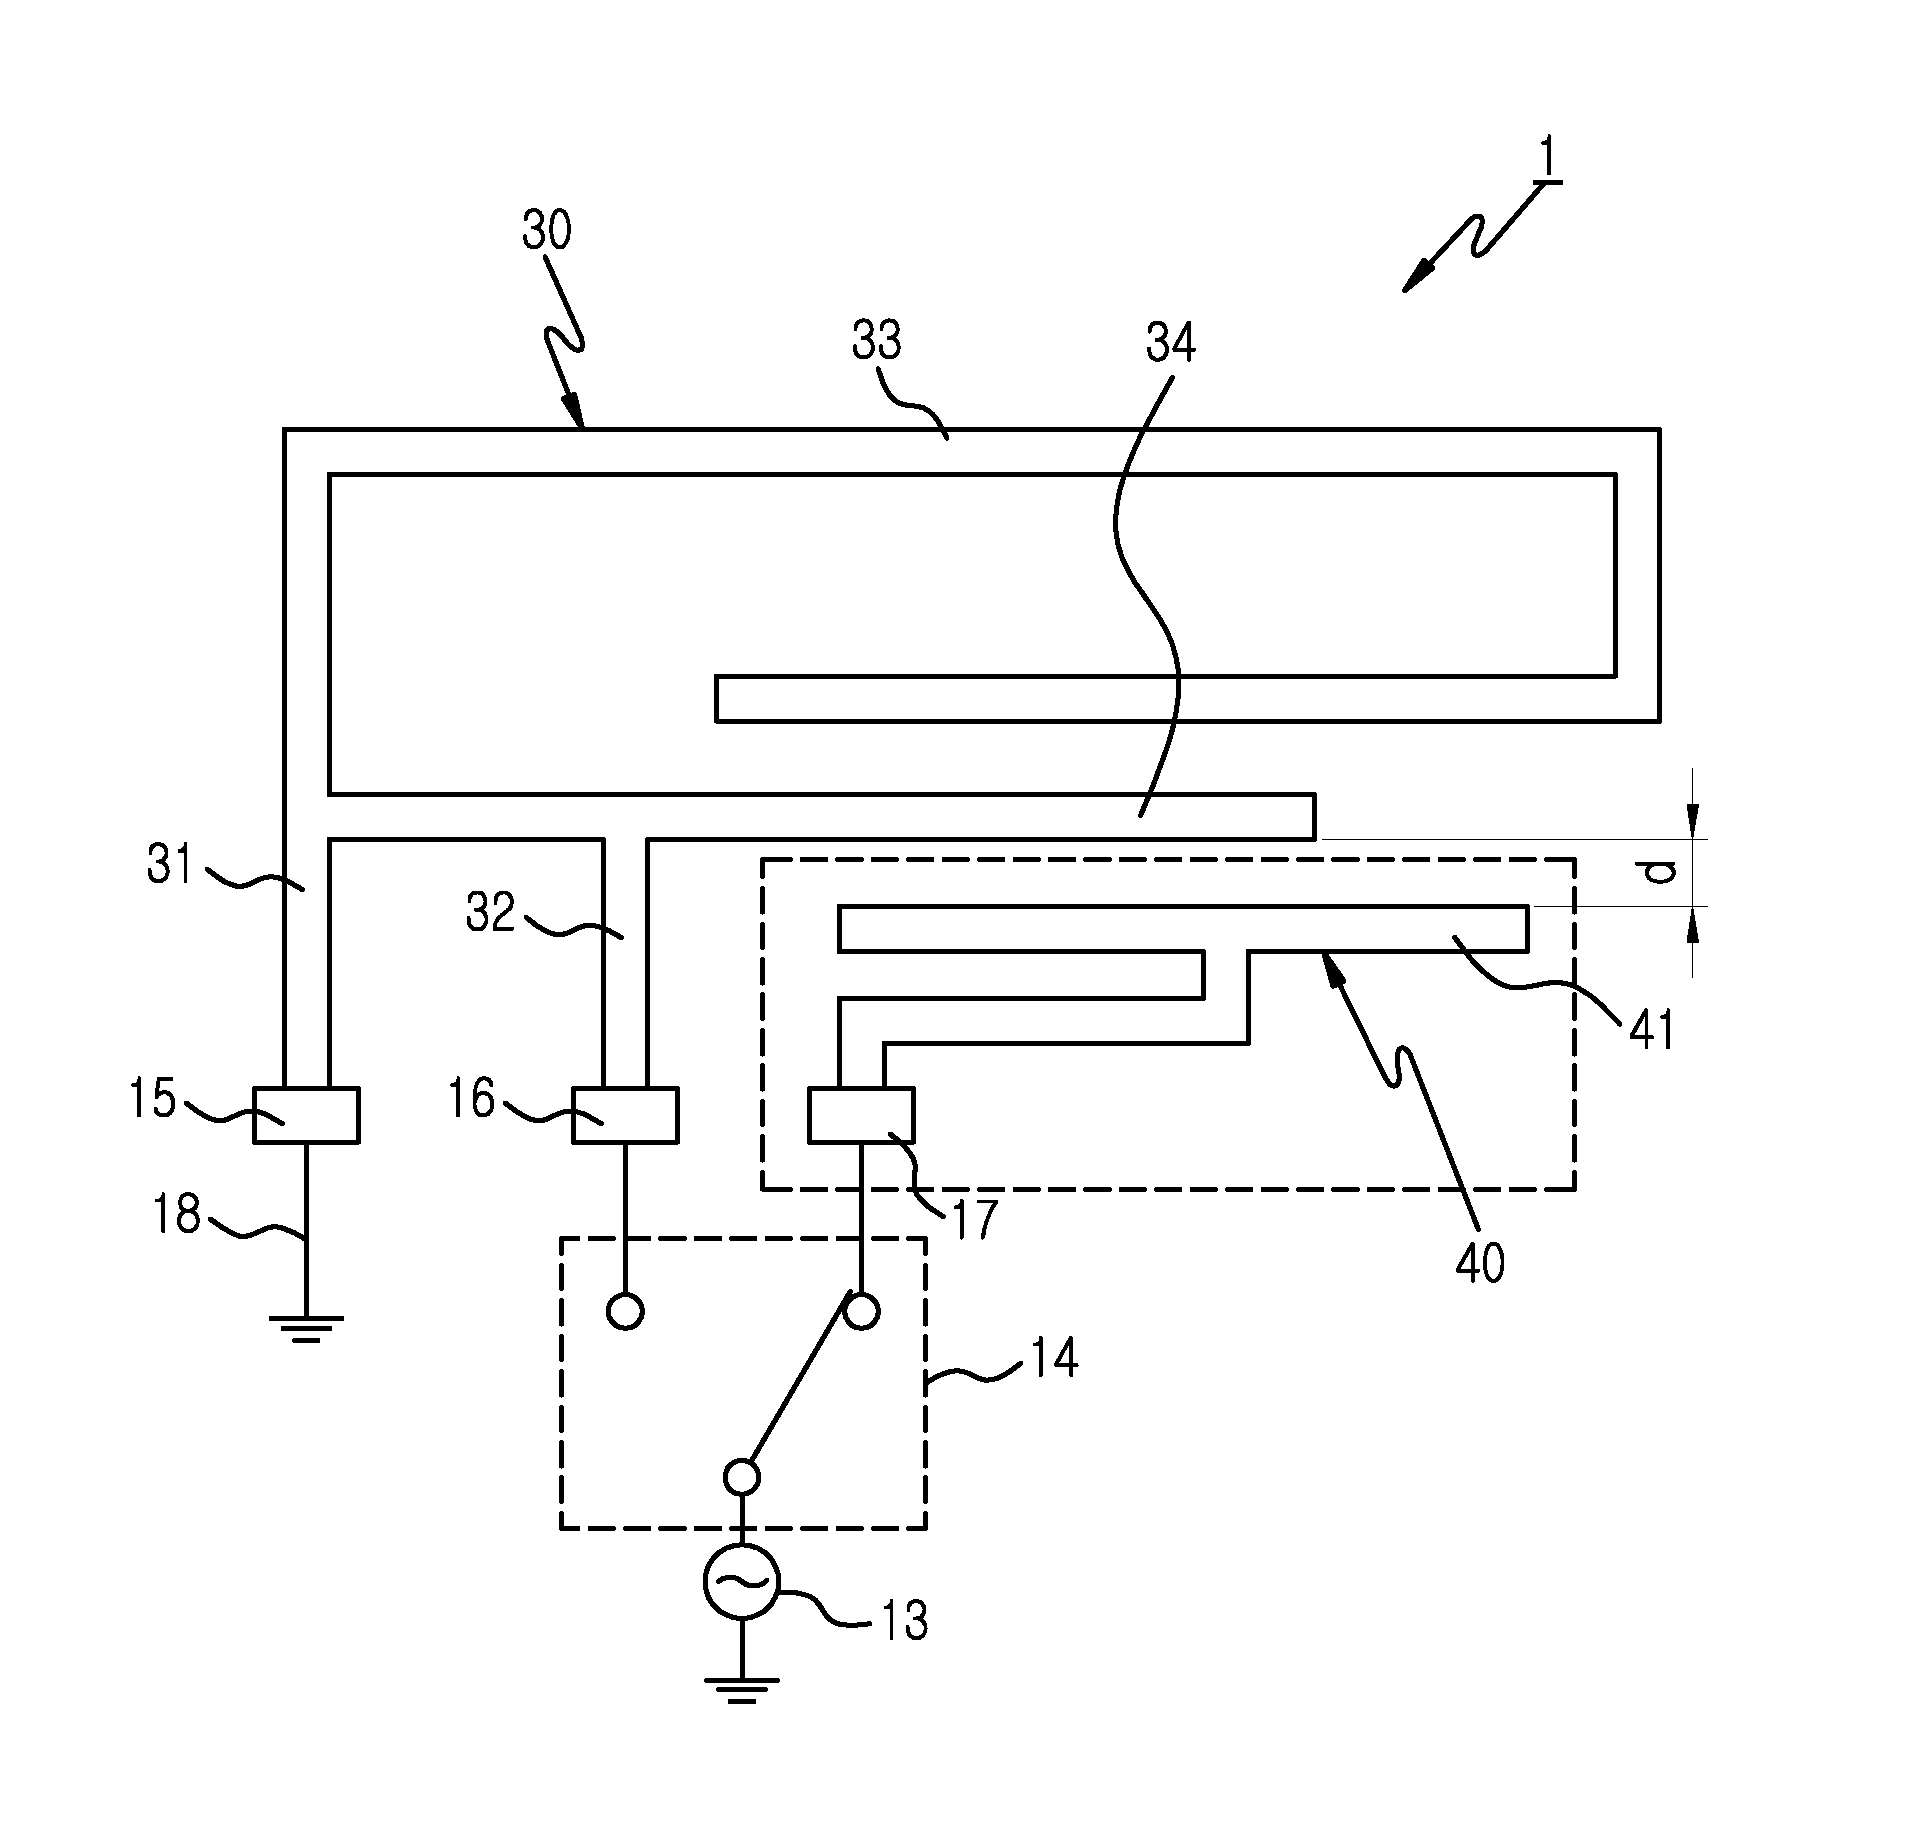 Built-in antenna for electronic device